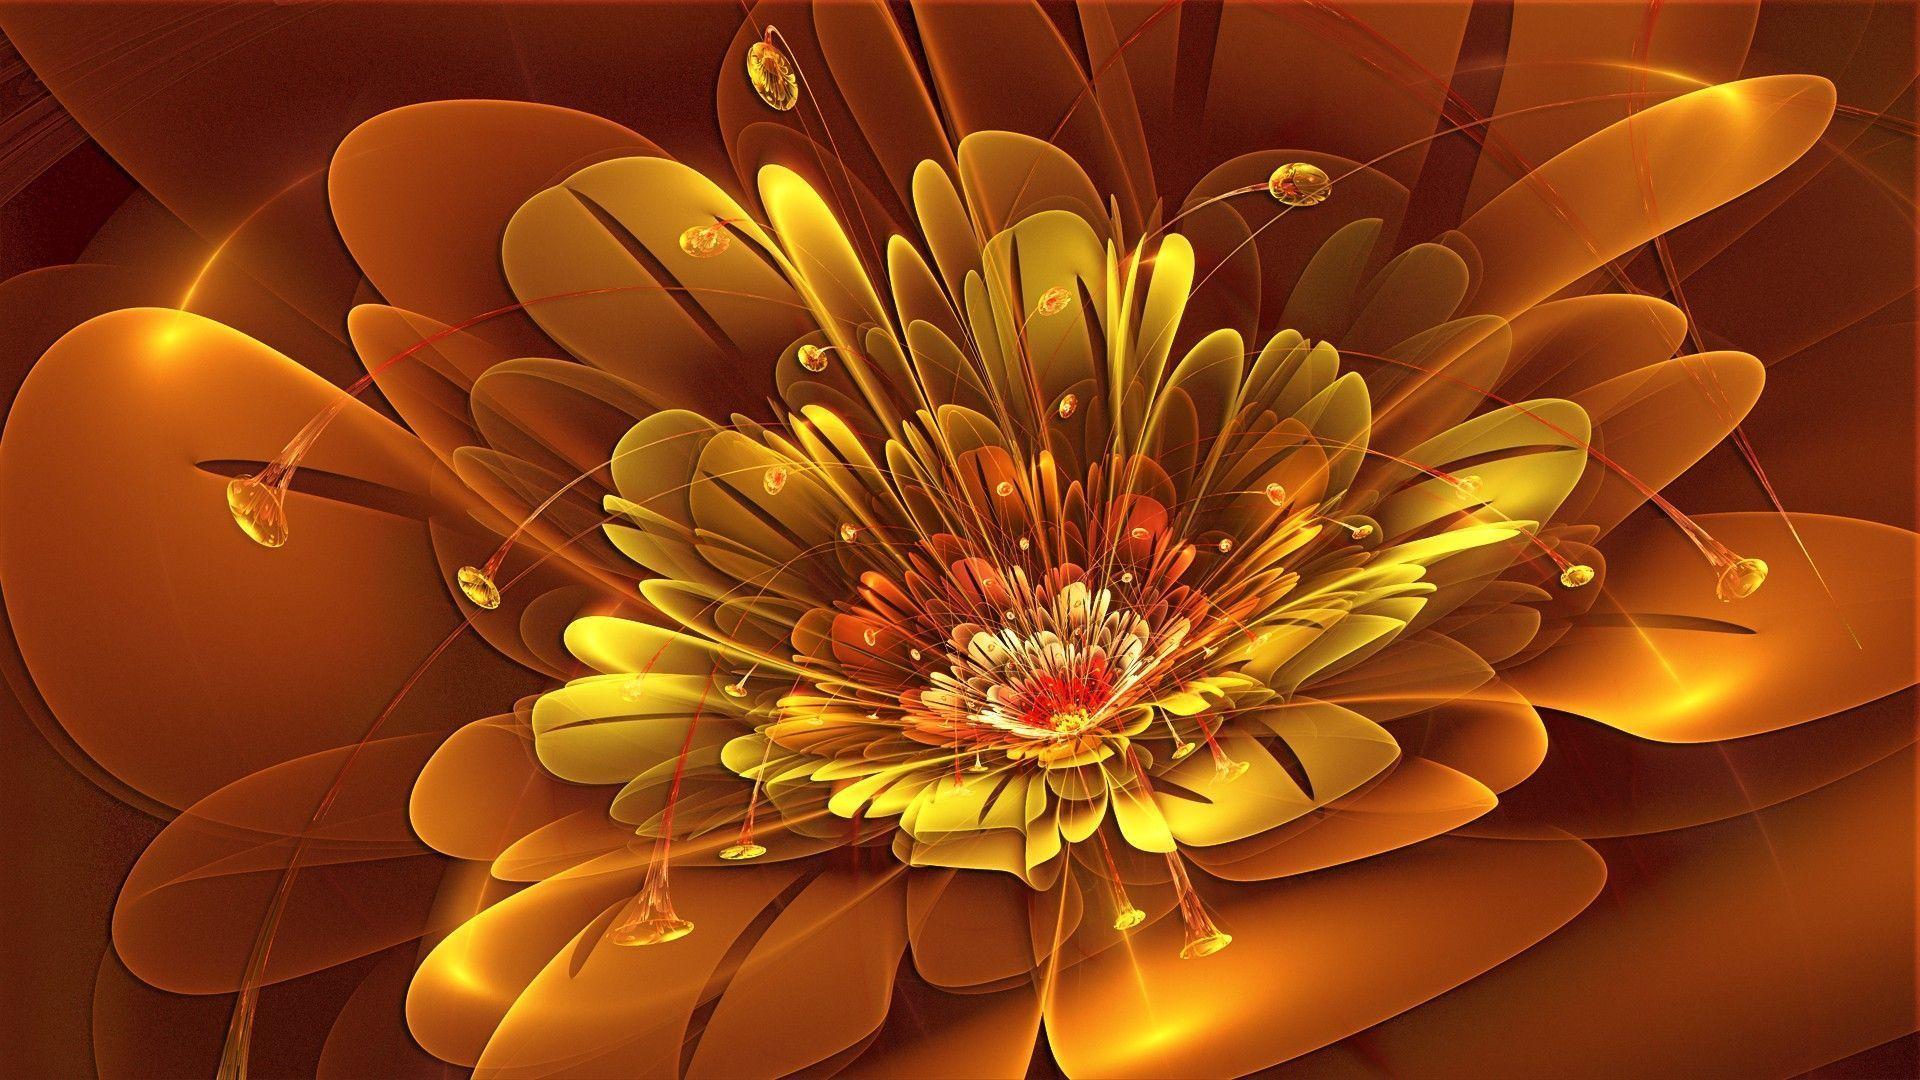 Abstract Flowers Wallpaper